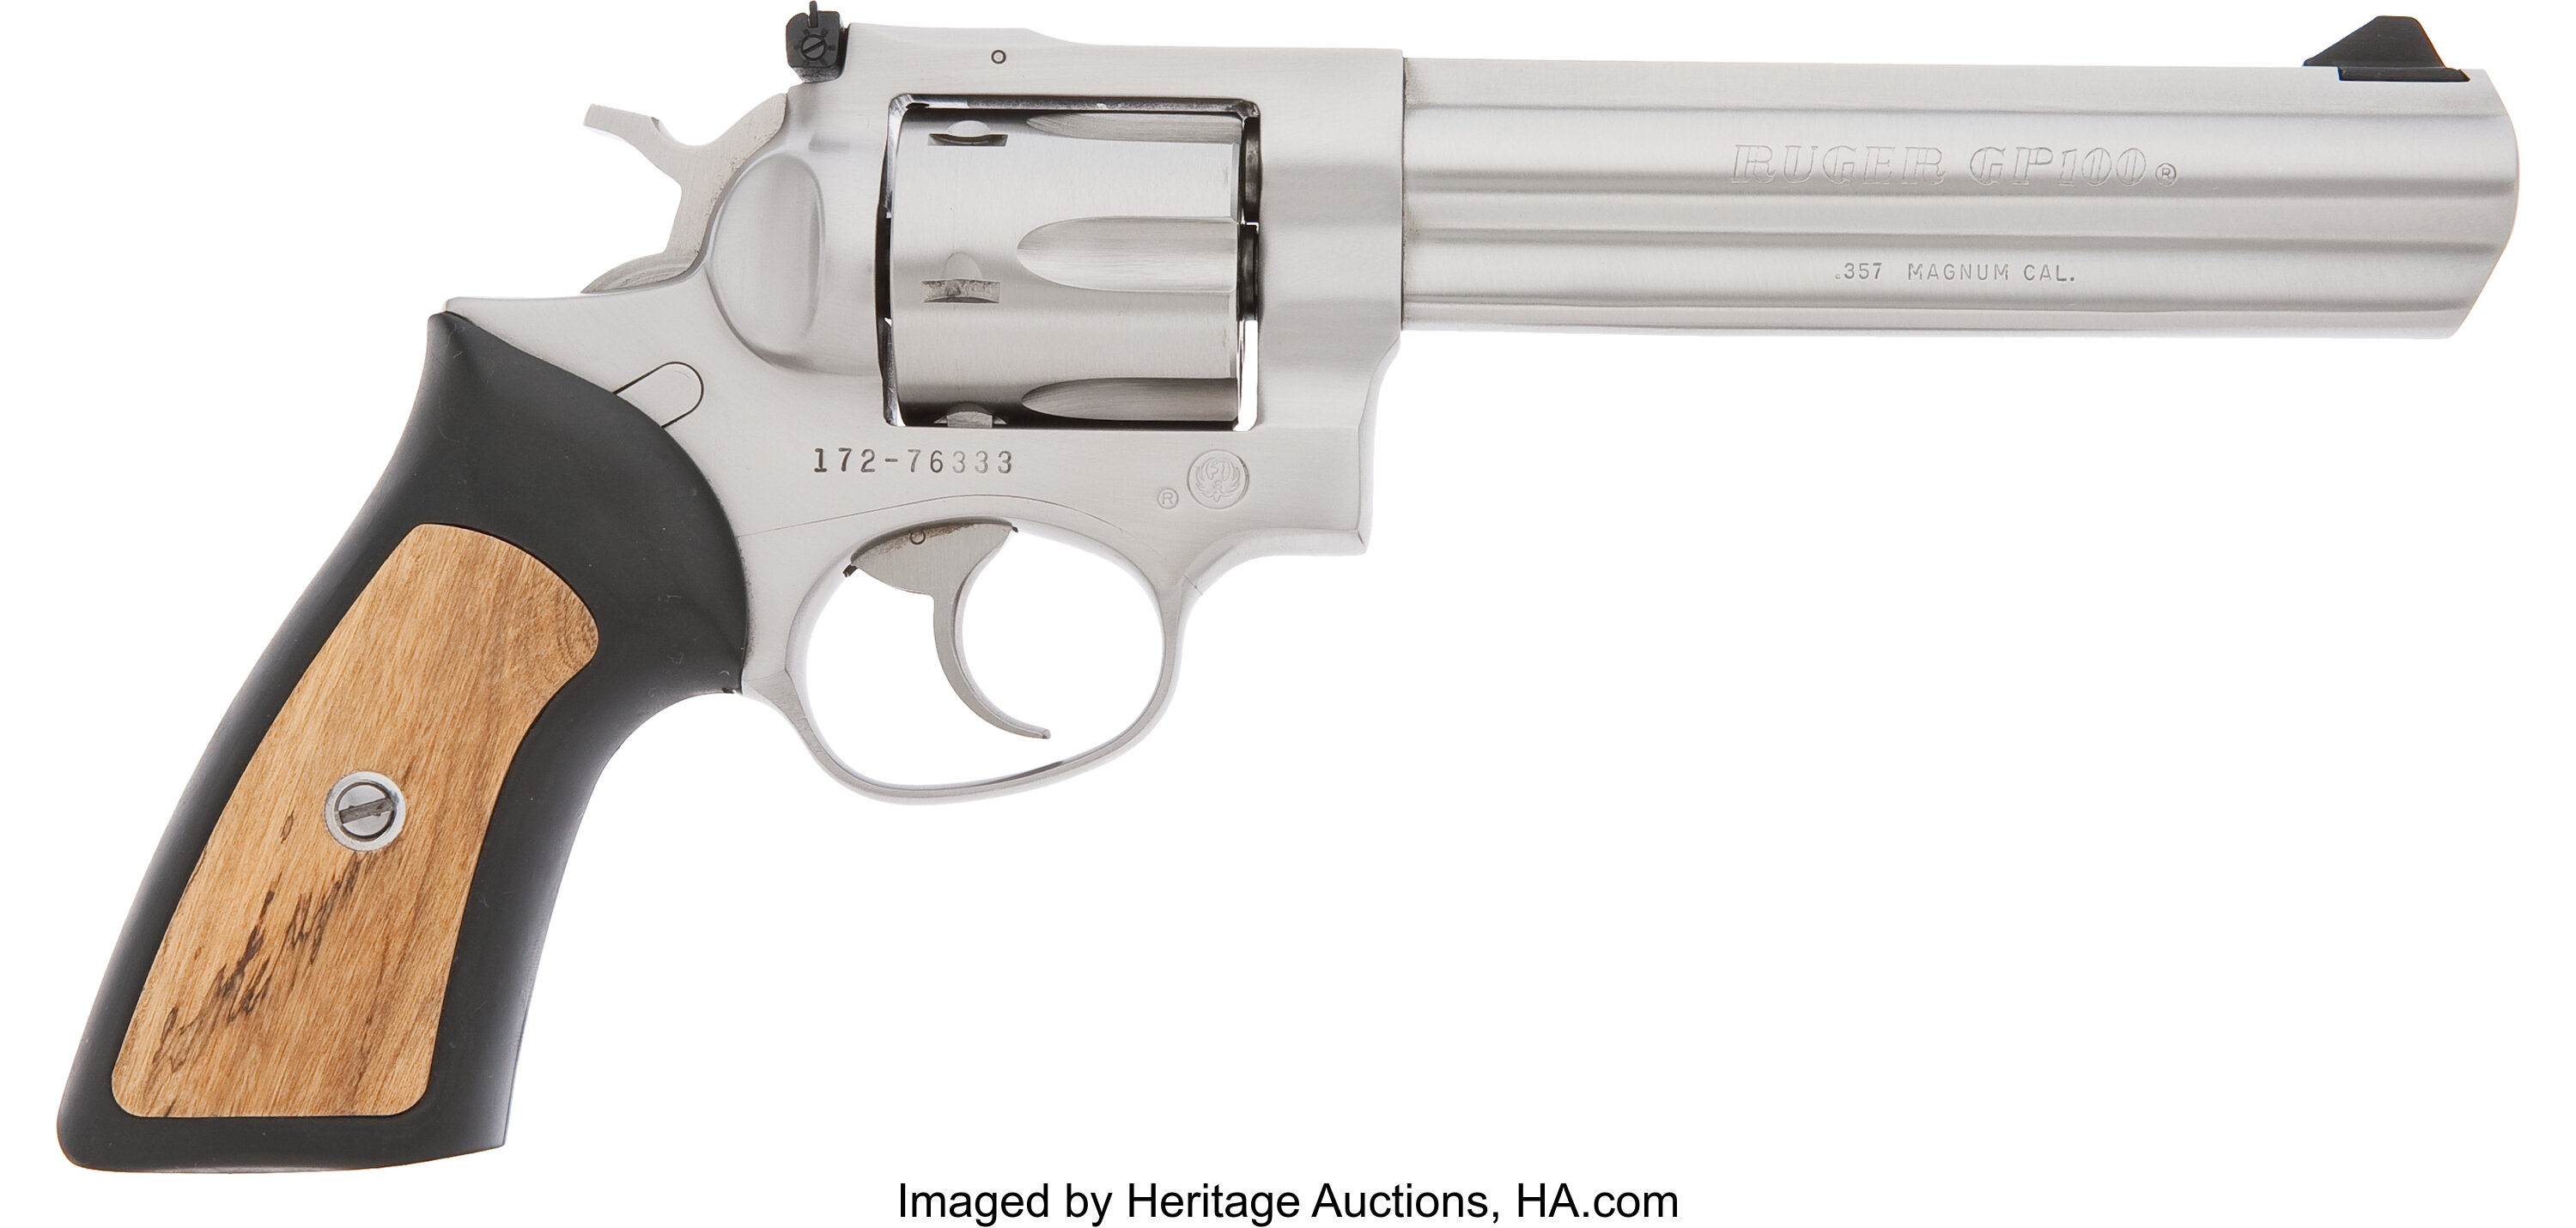 Ruger Gp100 357 Cal Revolver 172 Military Patriotic Lot Heritage Auctions